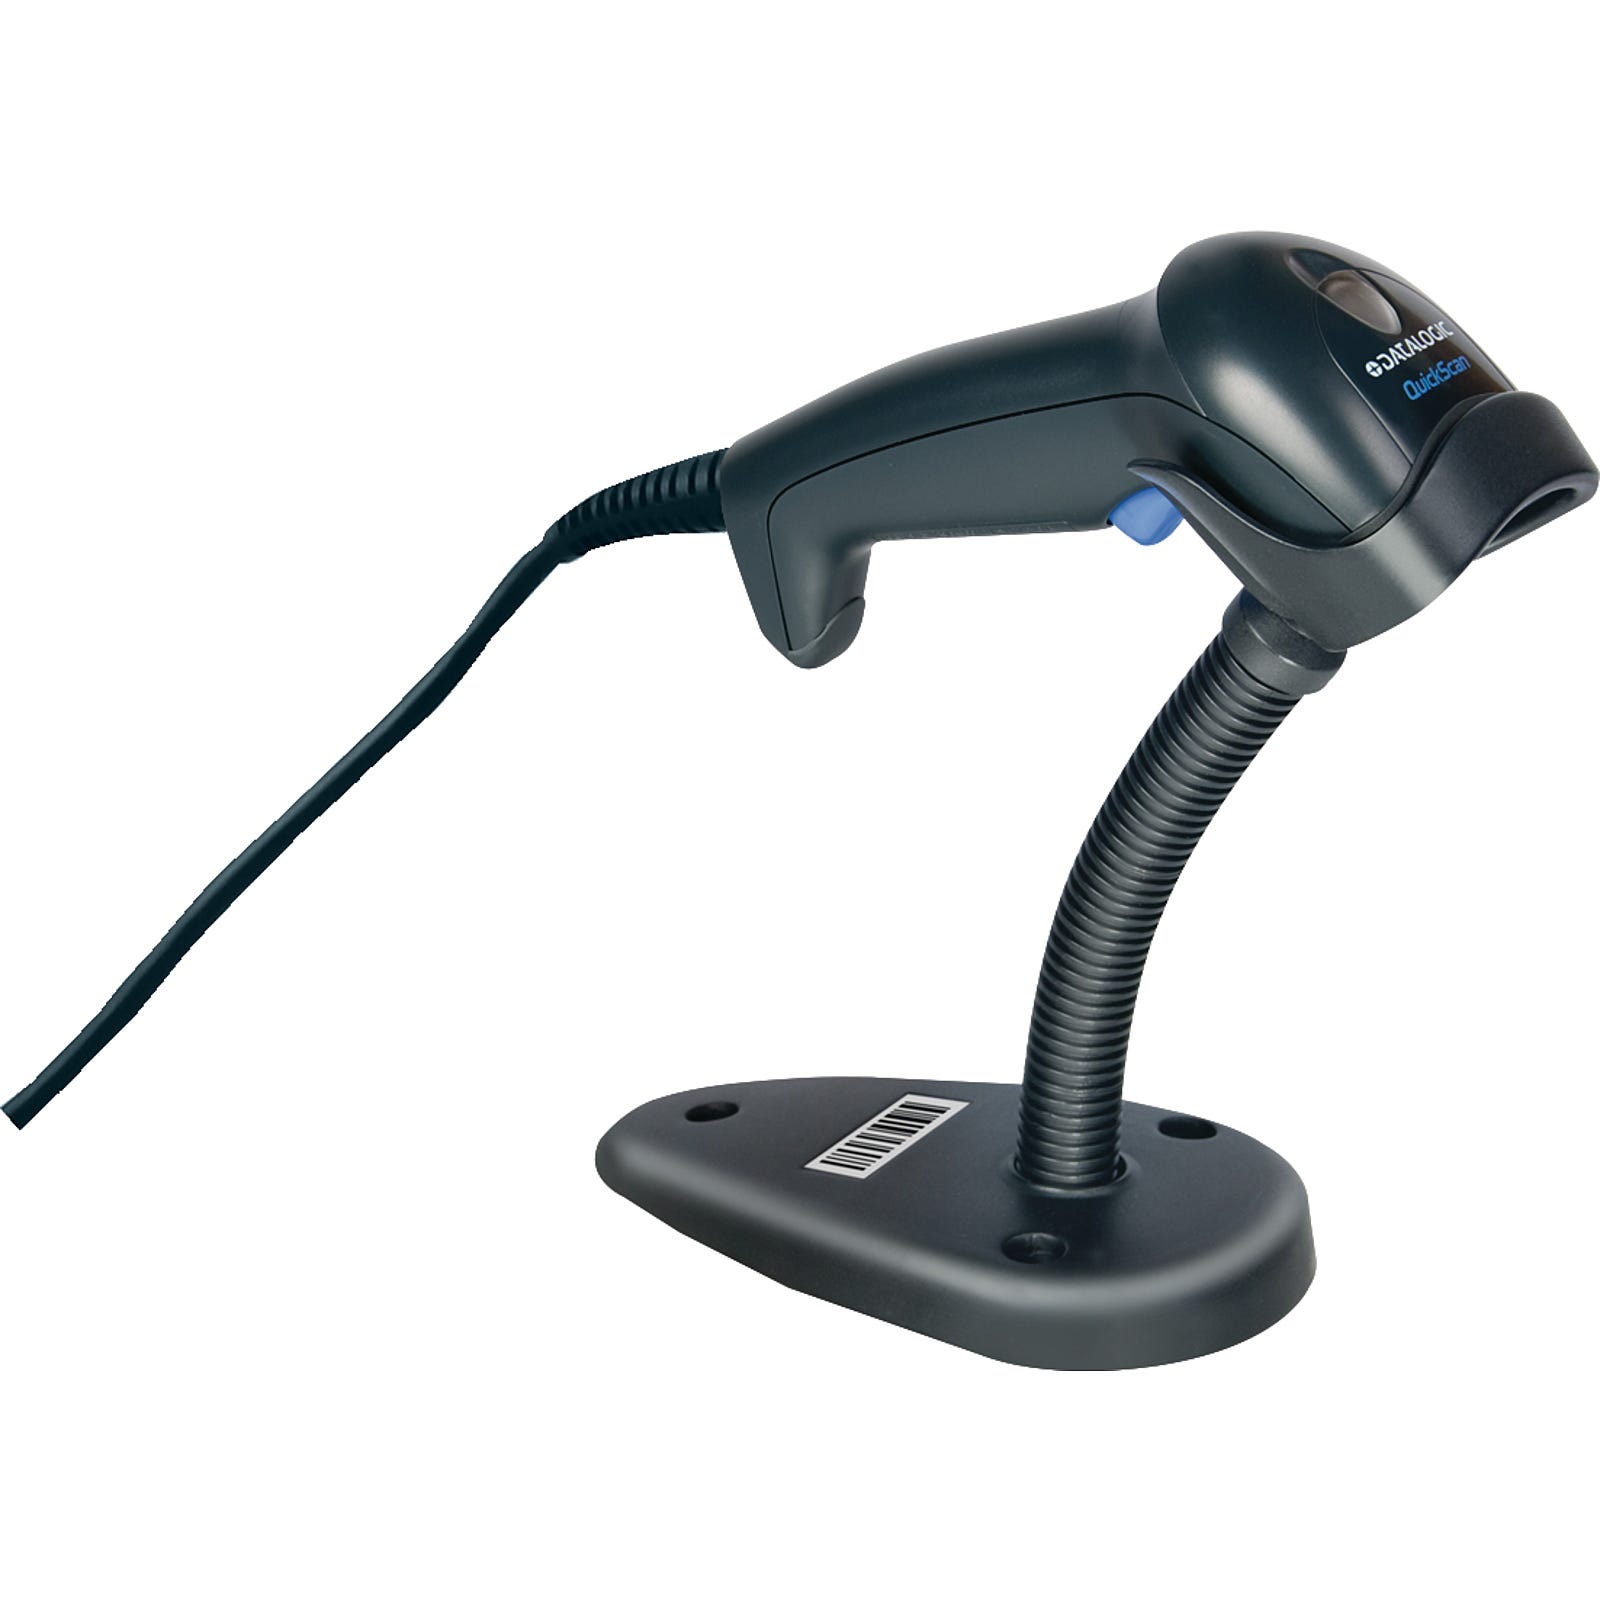 Bar Code Scanners,bar code scanners near me,barcode scanners,barcode scanner online,barcode scanning,barcode scanner price,walmart barcode scanner,Bar Code Scanners Stands,barcode scanner stand,barcode reader stand for